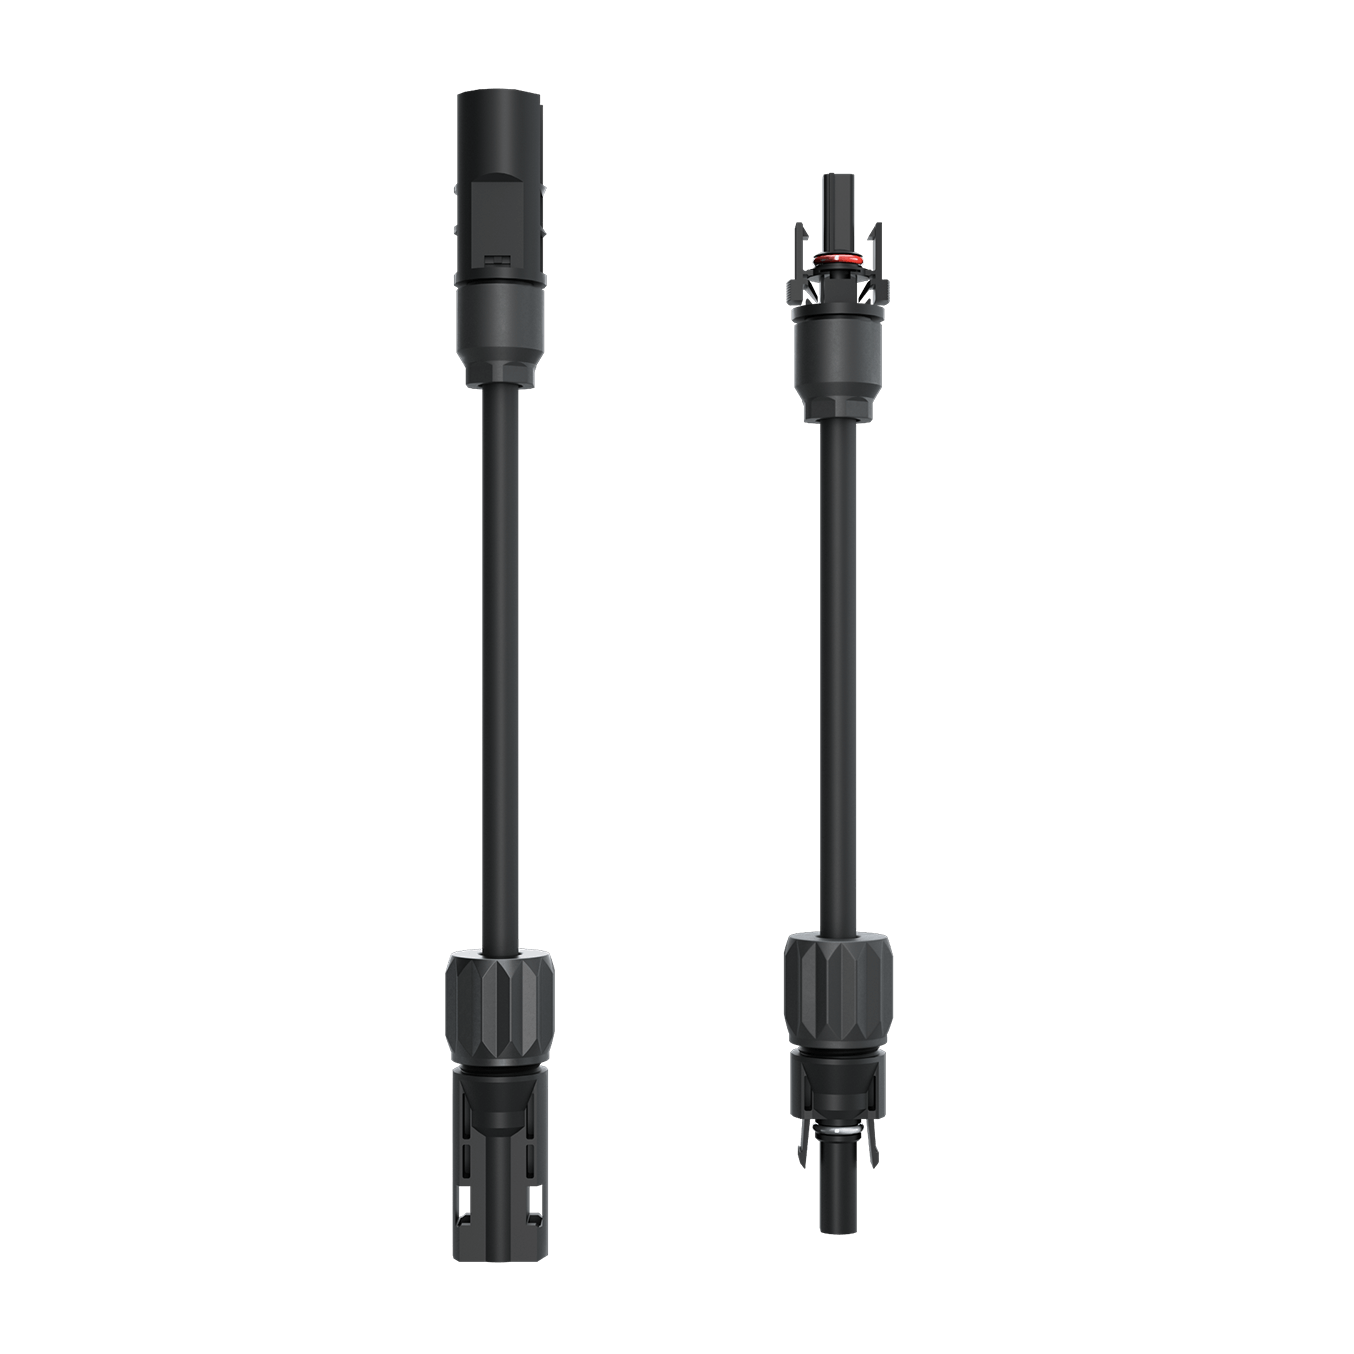 Cable Adaptor - H4 to Solarlok